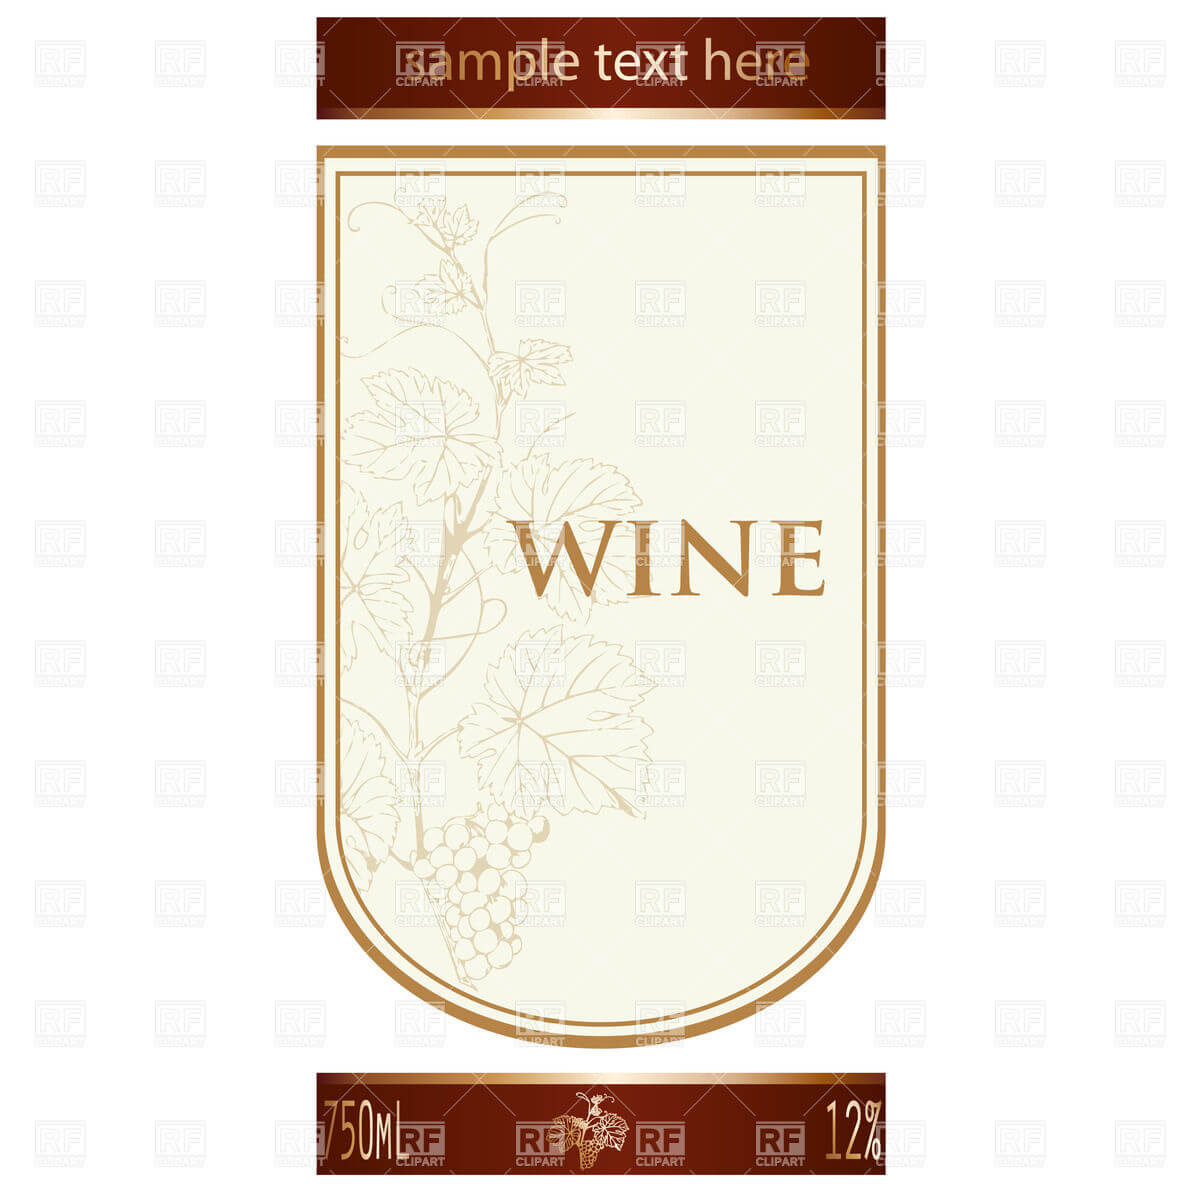 002 Template Ideas Free Wine Label Remarkable Bottle With Blank Wine Label Template